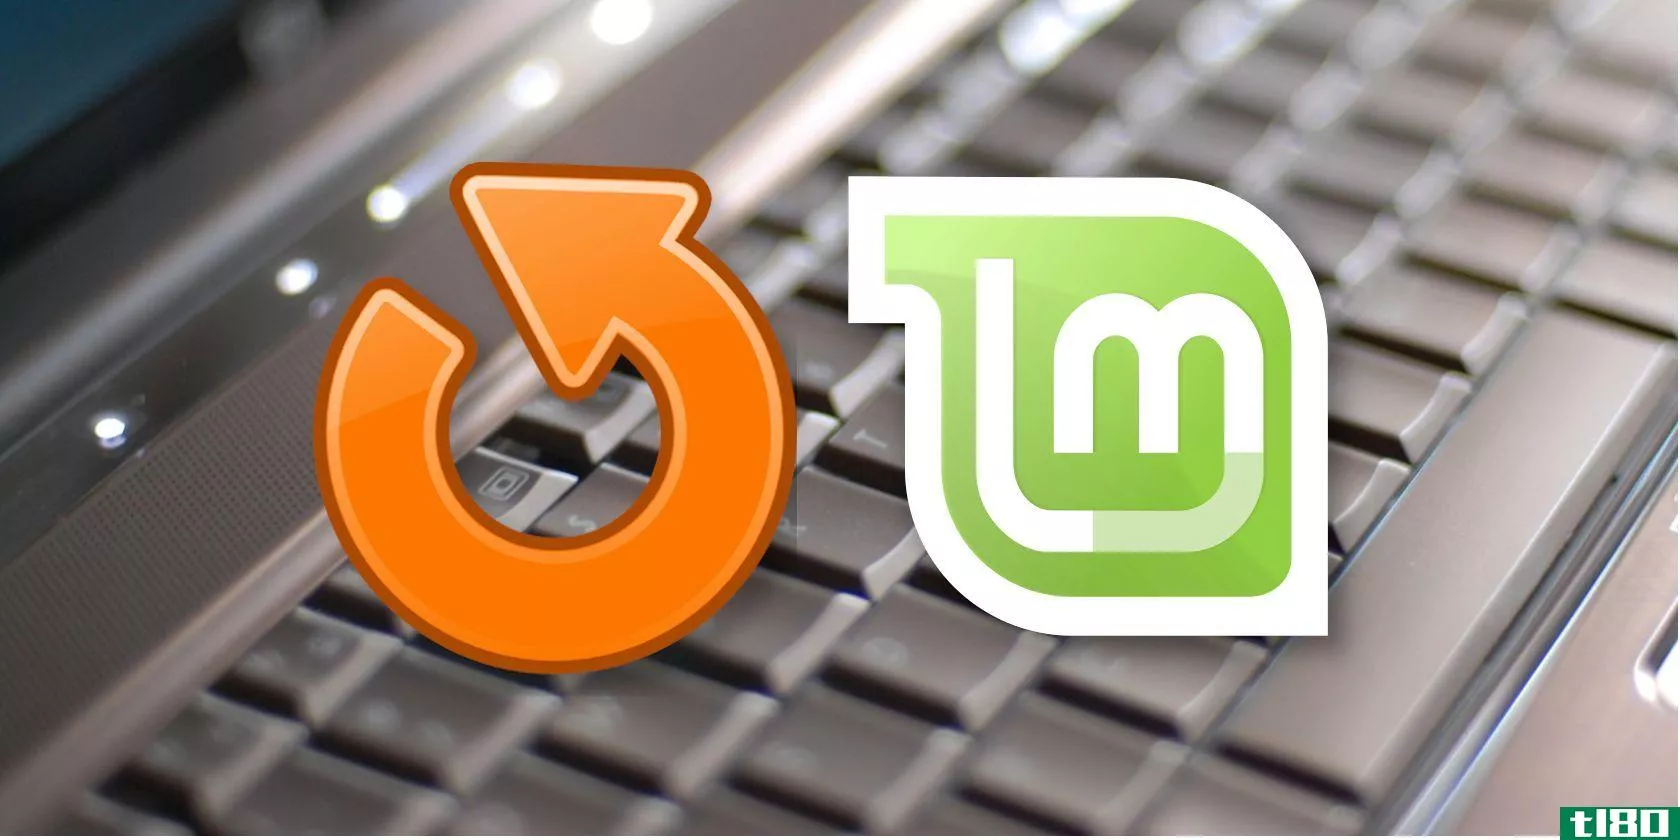 Upgrading Linux Mint